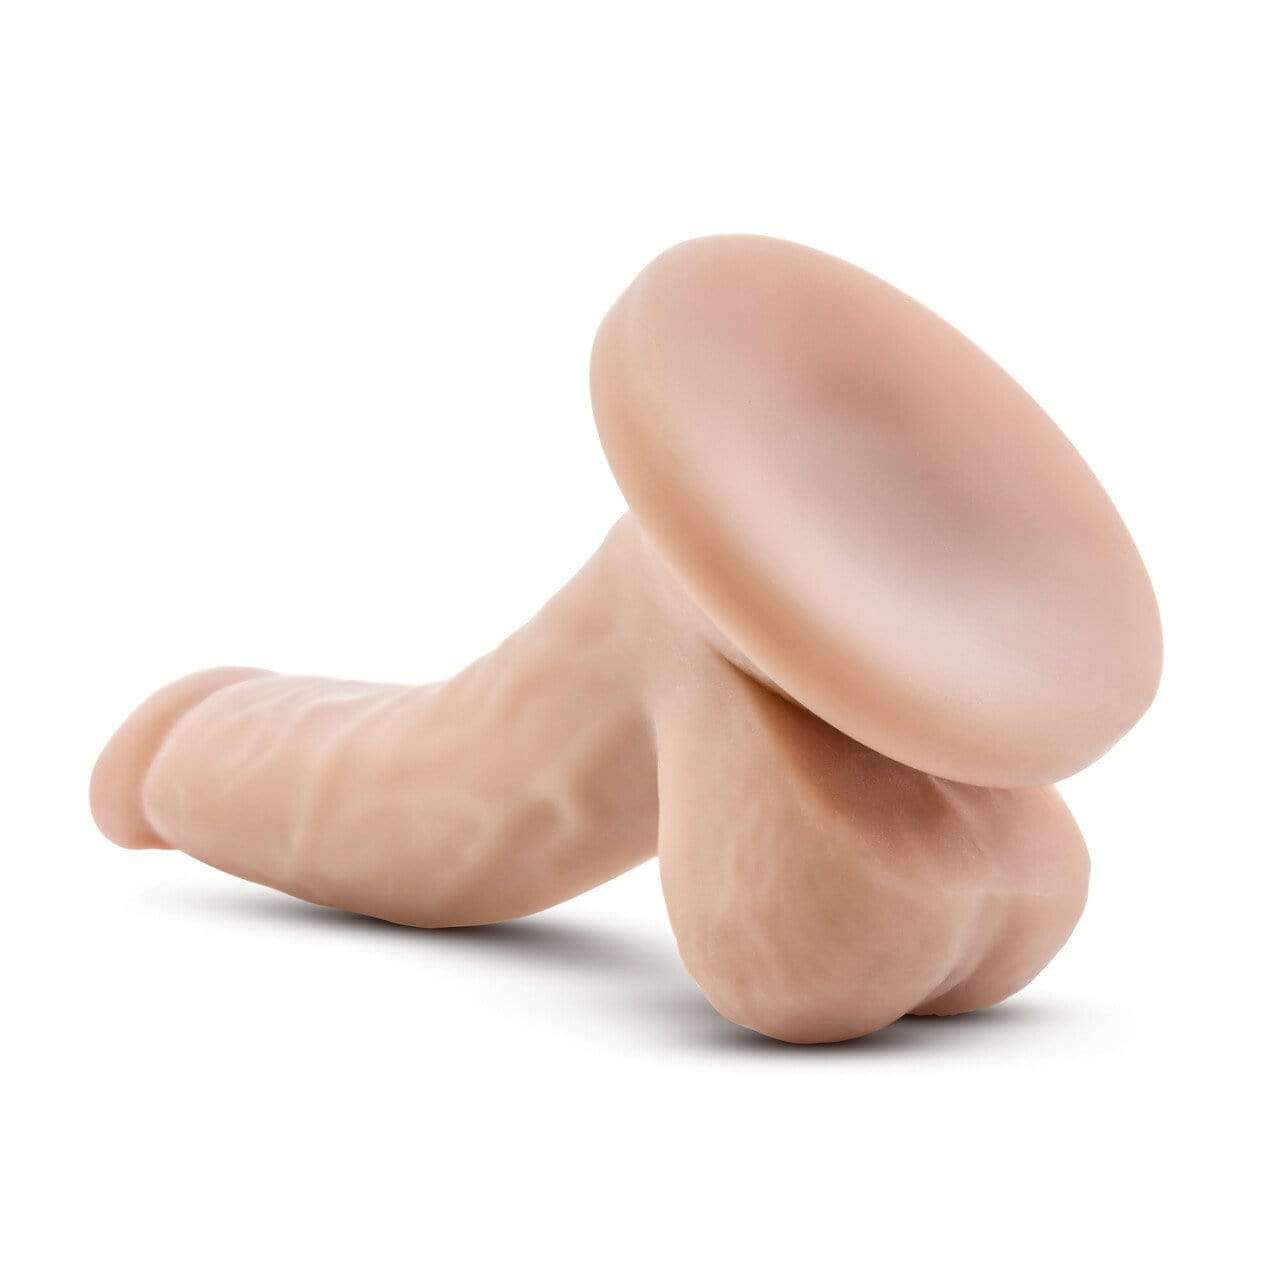 Dr. Skin 4" Mini Cock - Beige - Thorn & Feather Sex Toy Canada